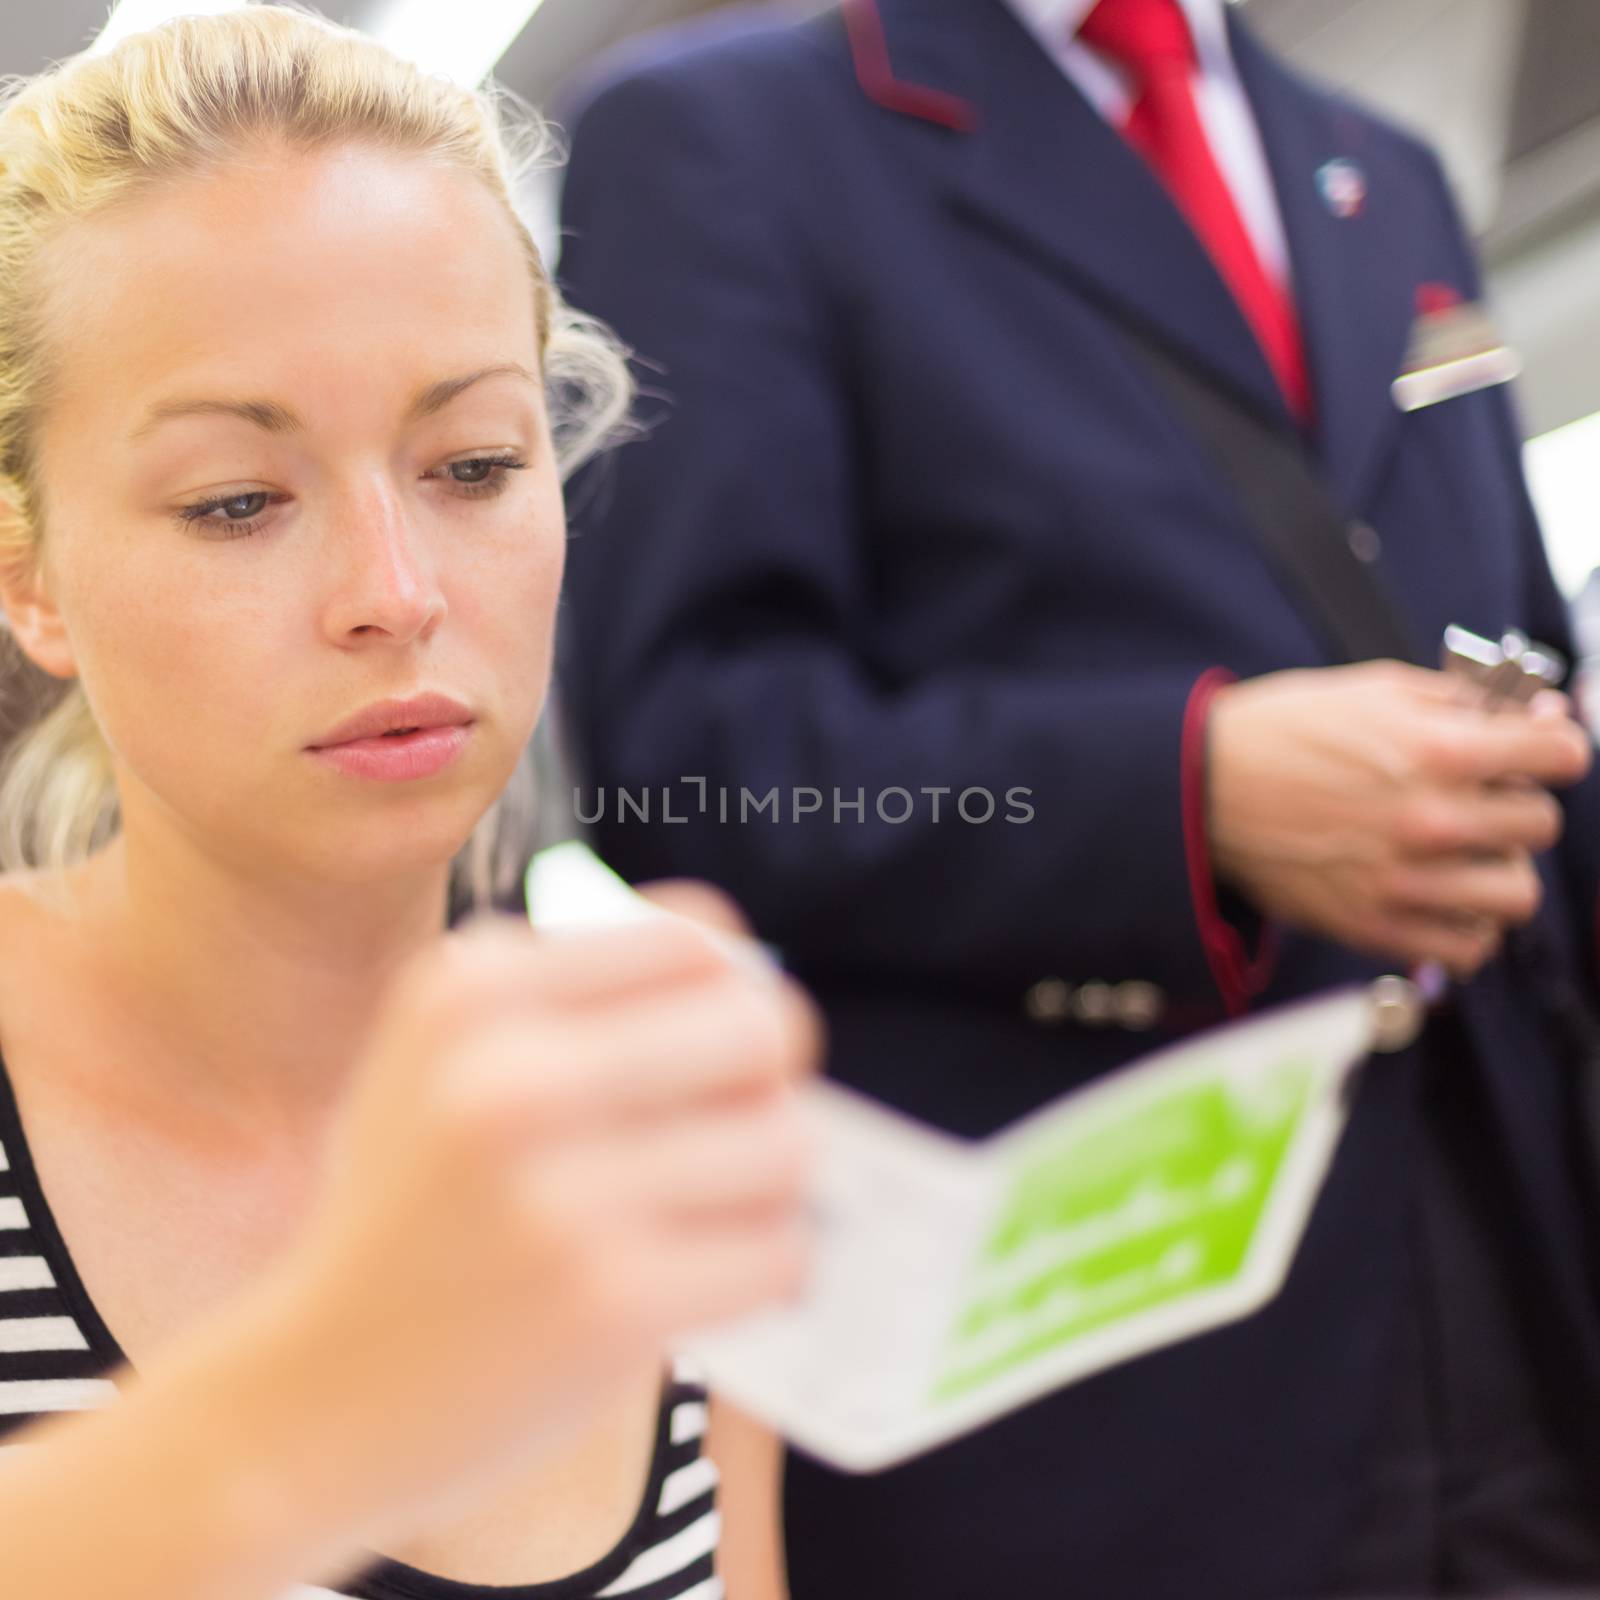 Train ticket check. by kasto